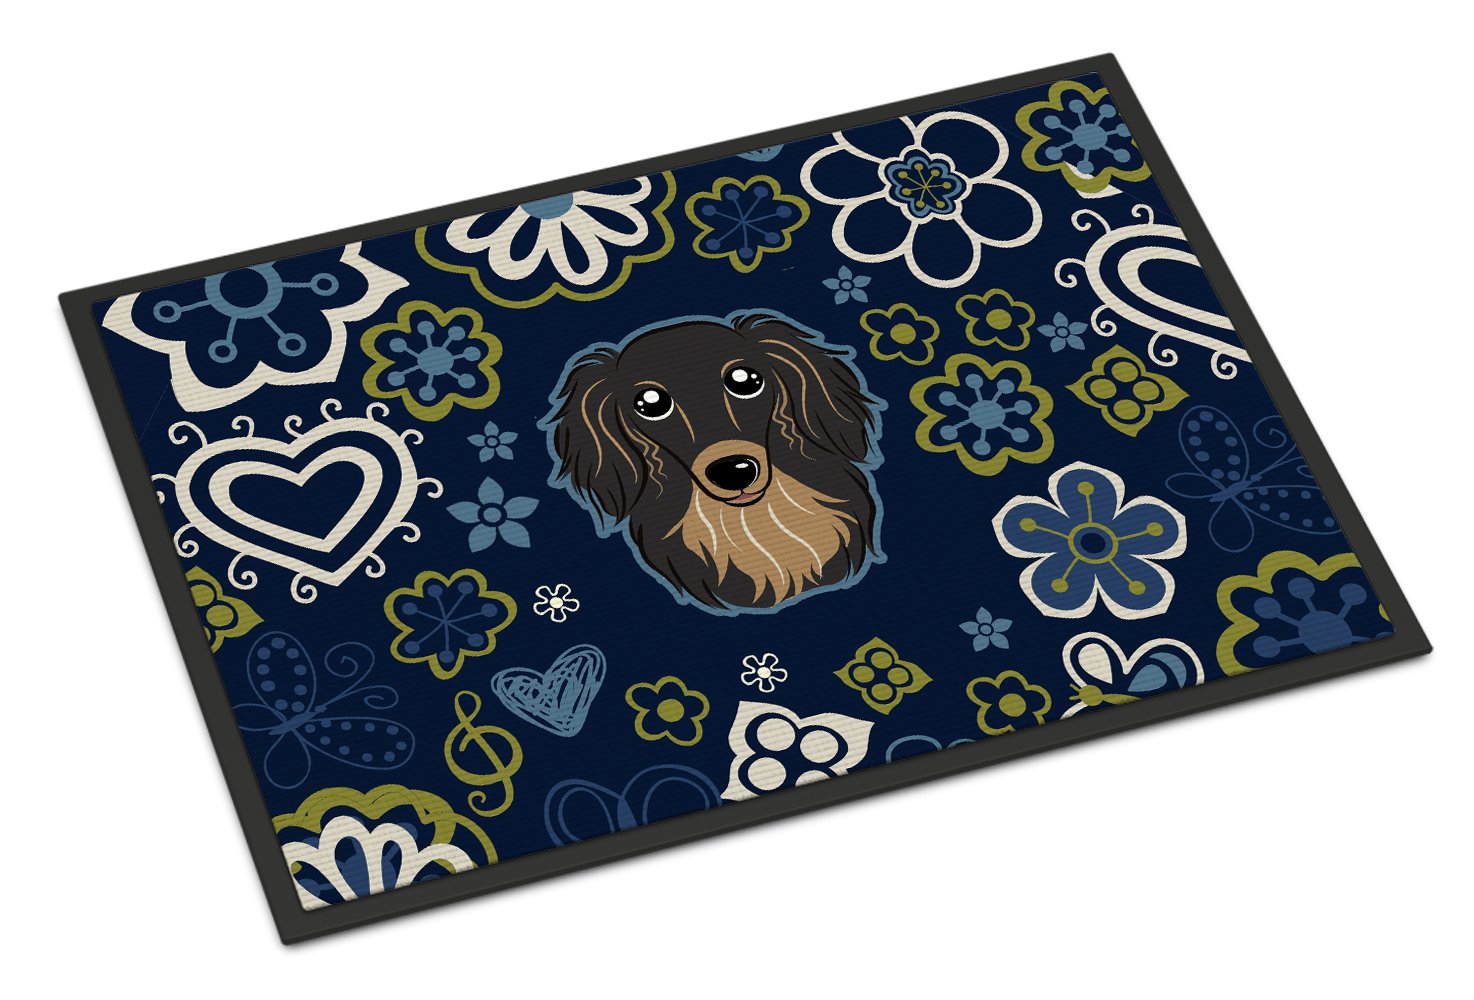 Blue Flowers Longhair Black and Tan Dachshund Indoor or Outdoor Mat 24x36 BB5064JMAT by Caroline's Treasures